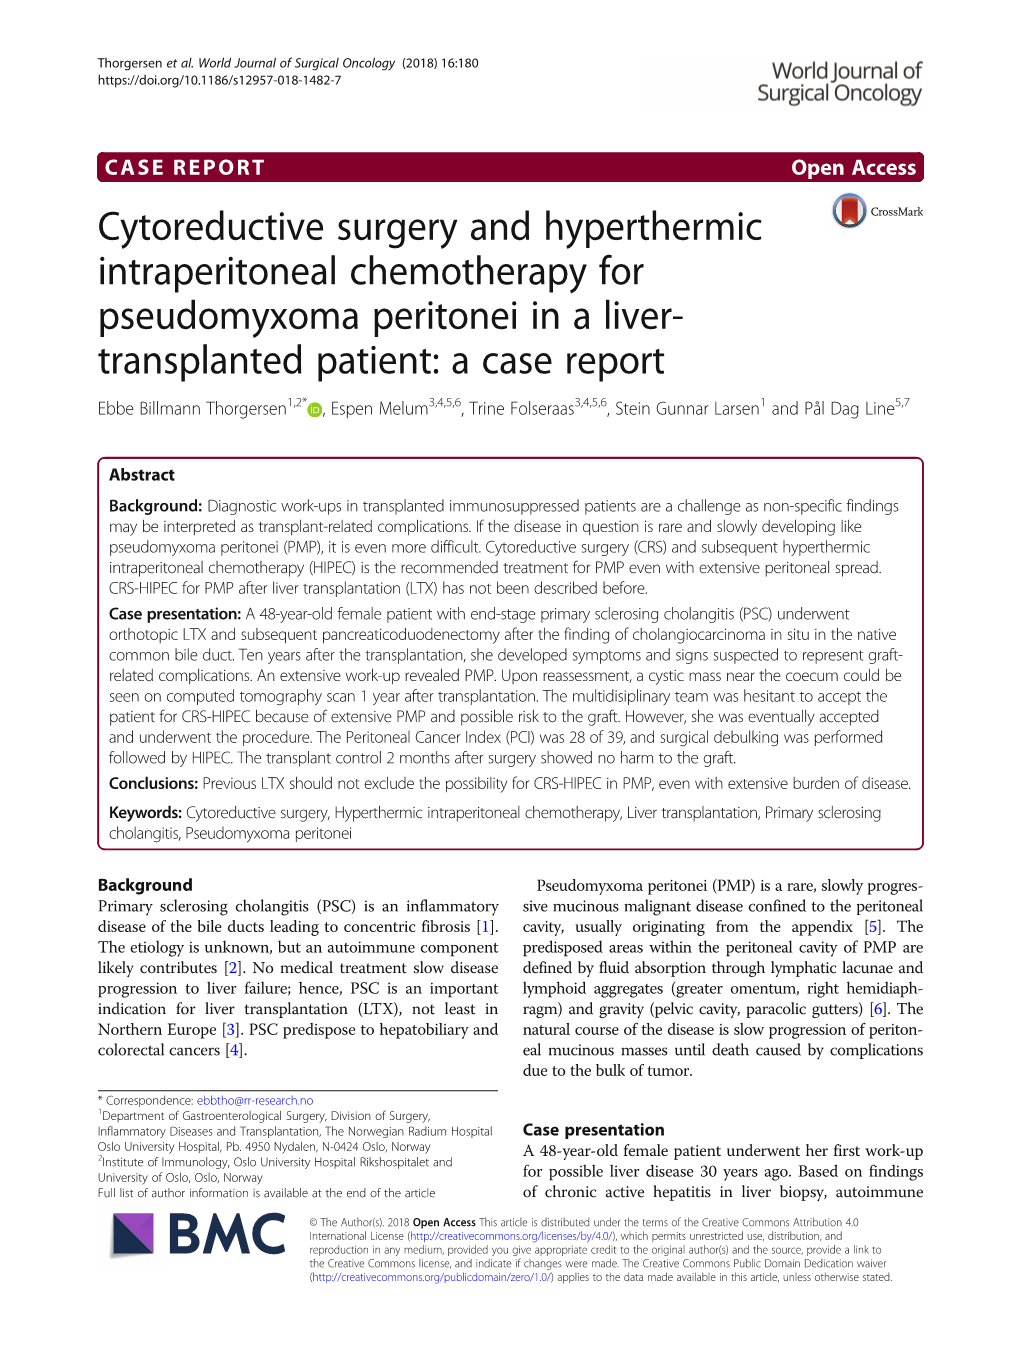 Cytoreductive Surgery and Hyperthermic Intraperitoneal